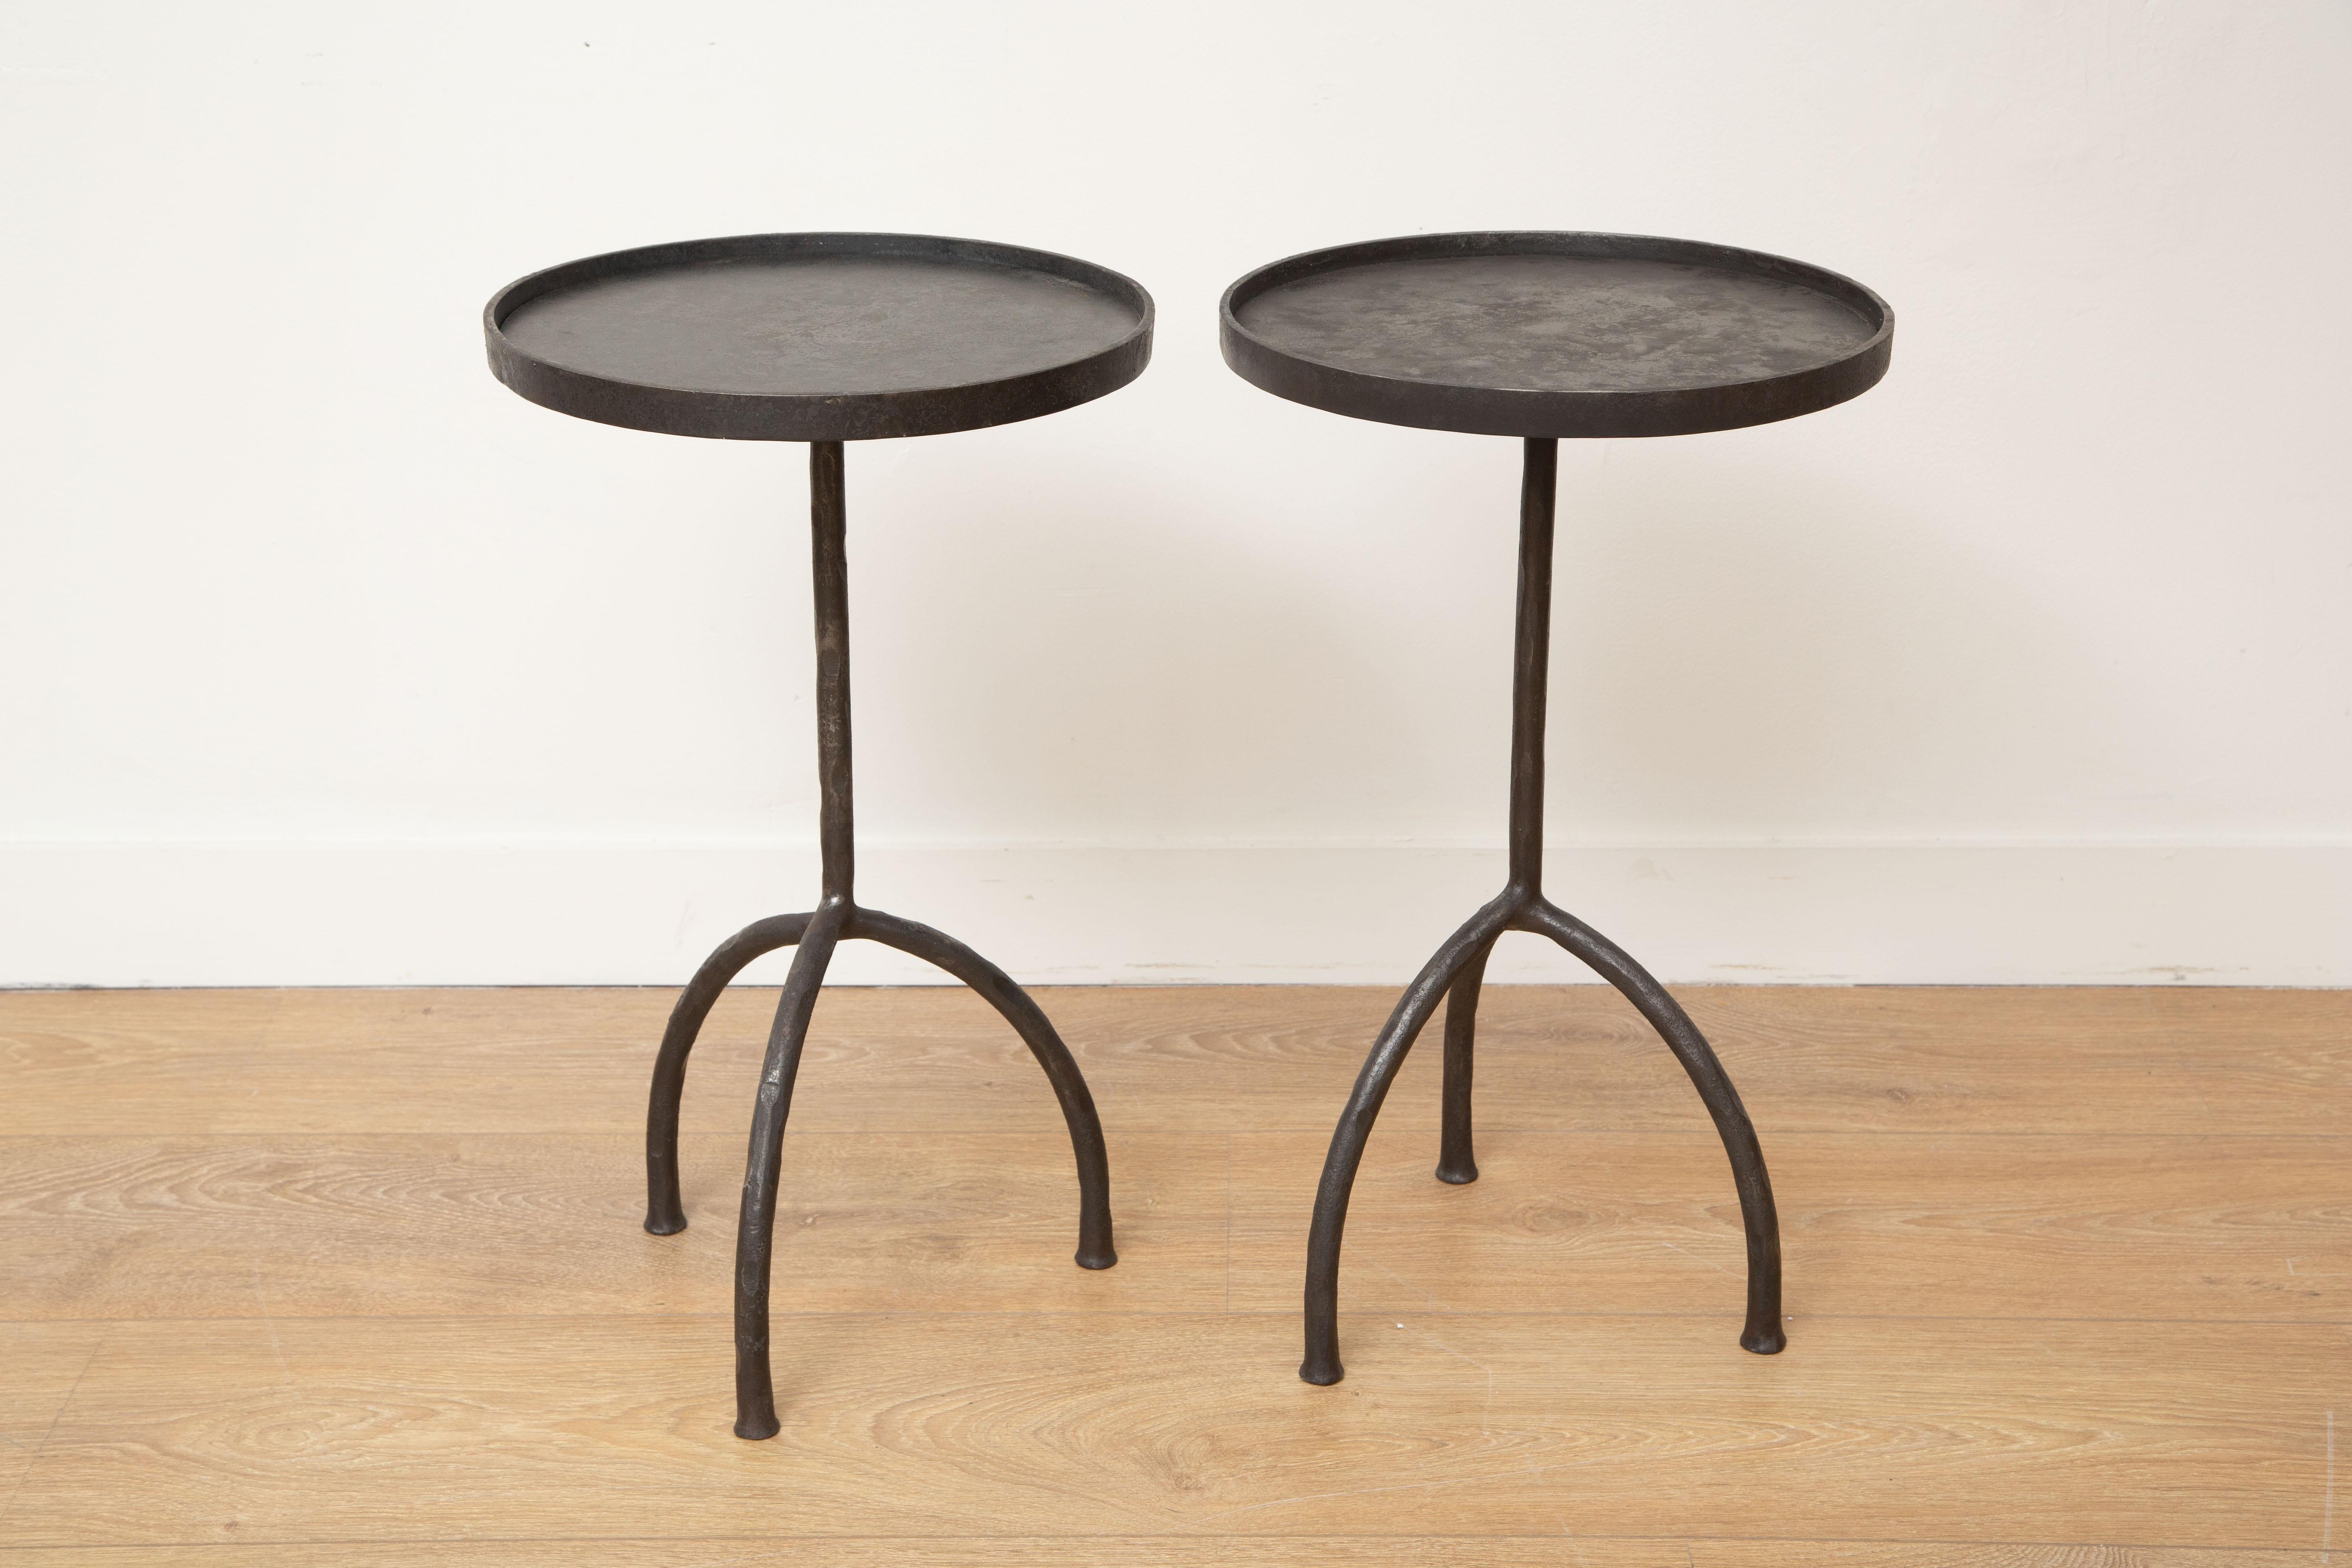 Custom tripod hand-forged side or drinks tables, in stock
Hand-forged iron legs, round top with lip
Dark bronze patina
Pefect for drinks, side, end tables
Can be sold individually
Ready to ship from our showroom in Miami.